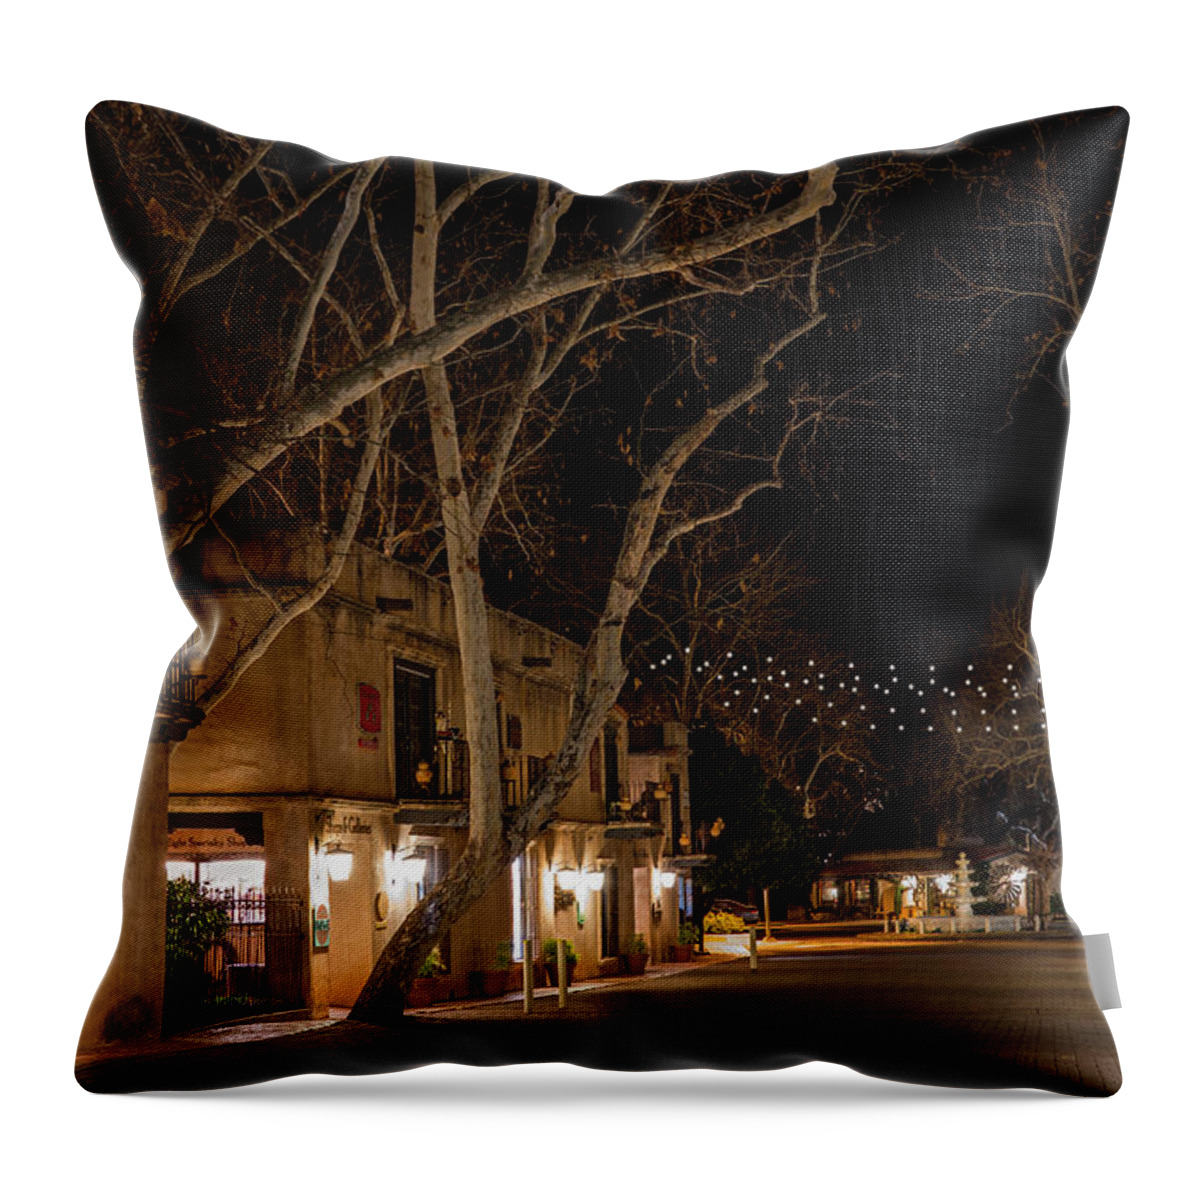  Throw Pillow featuring the photograph Tlaquepaque at Night by Al Judge